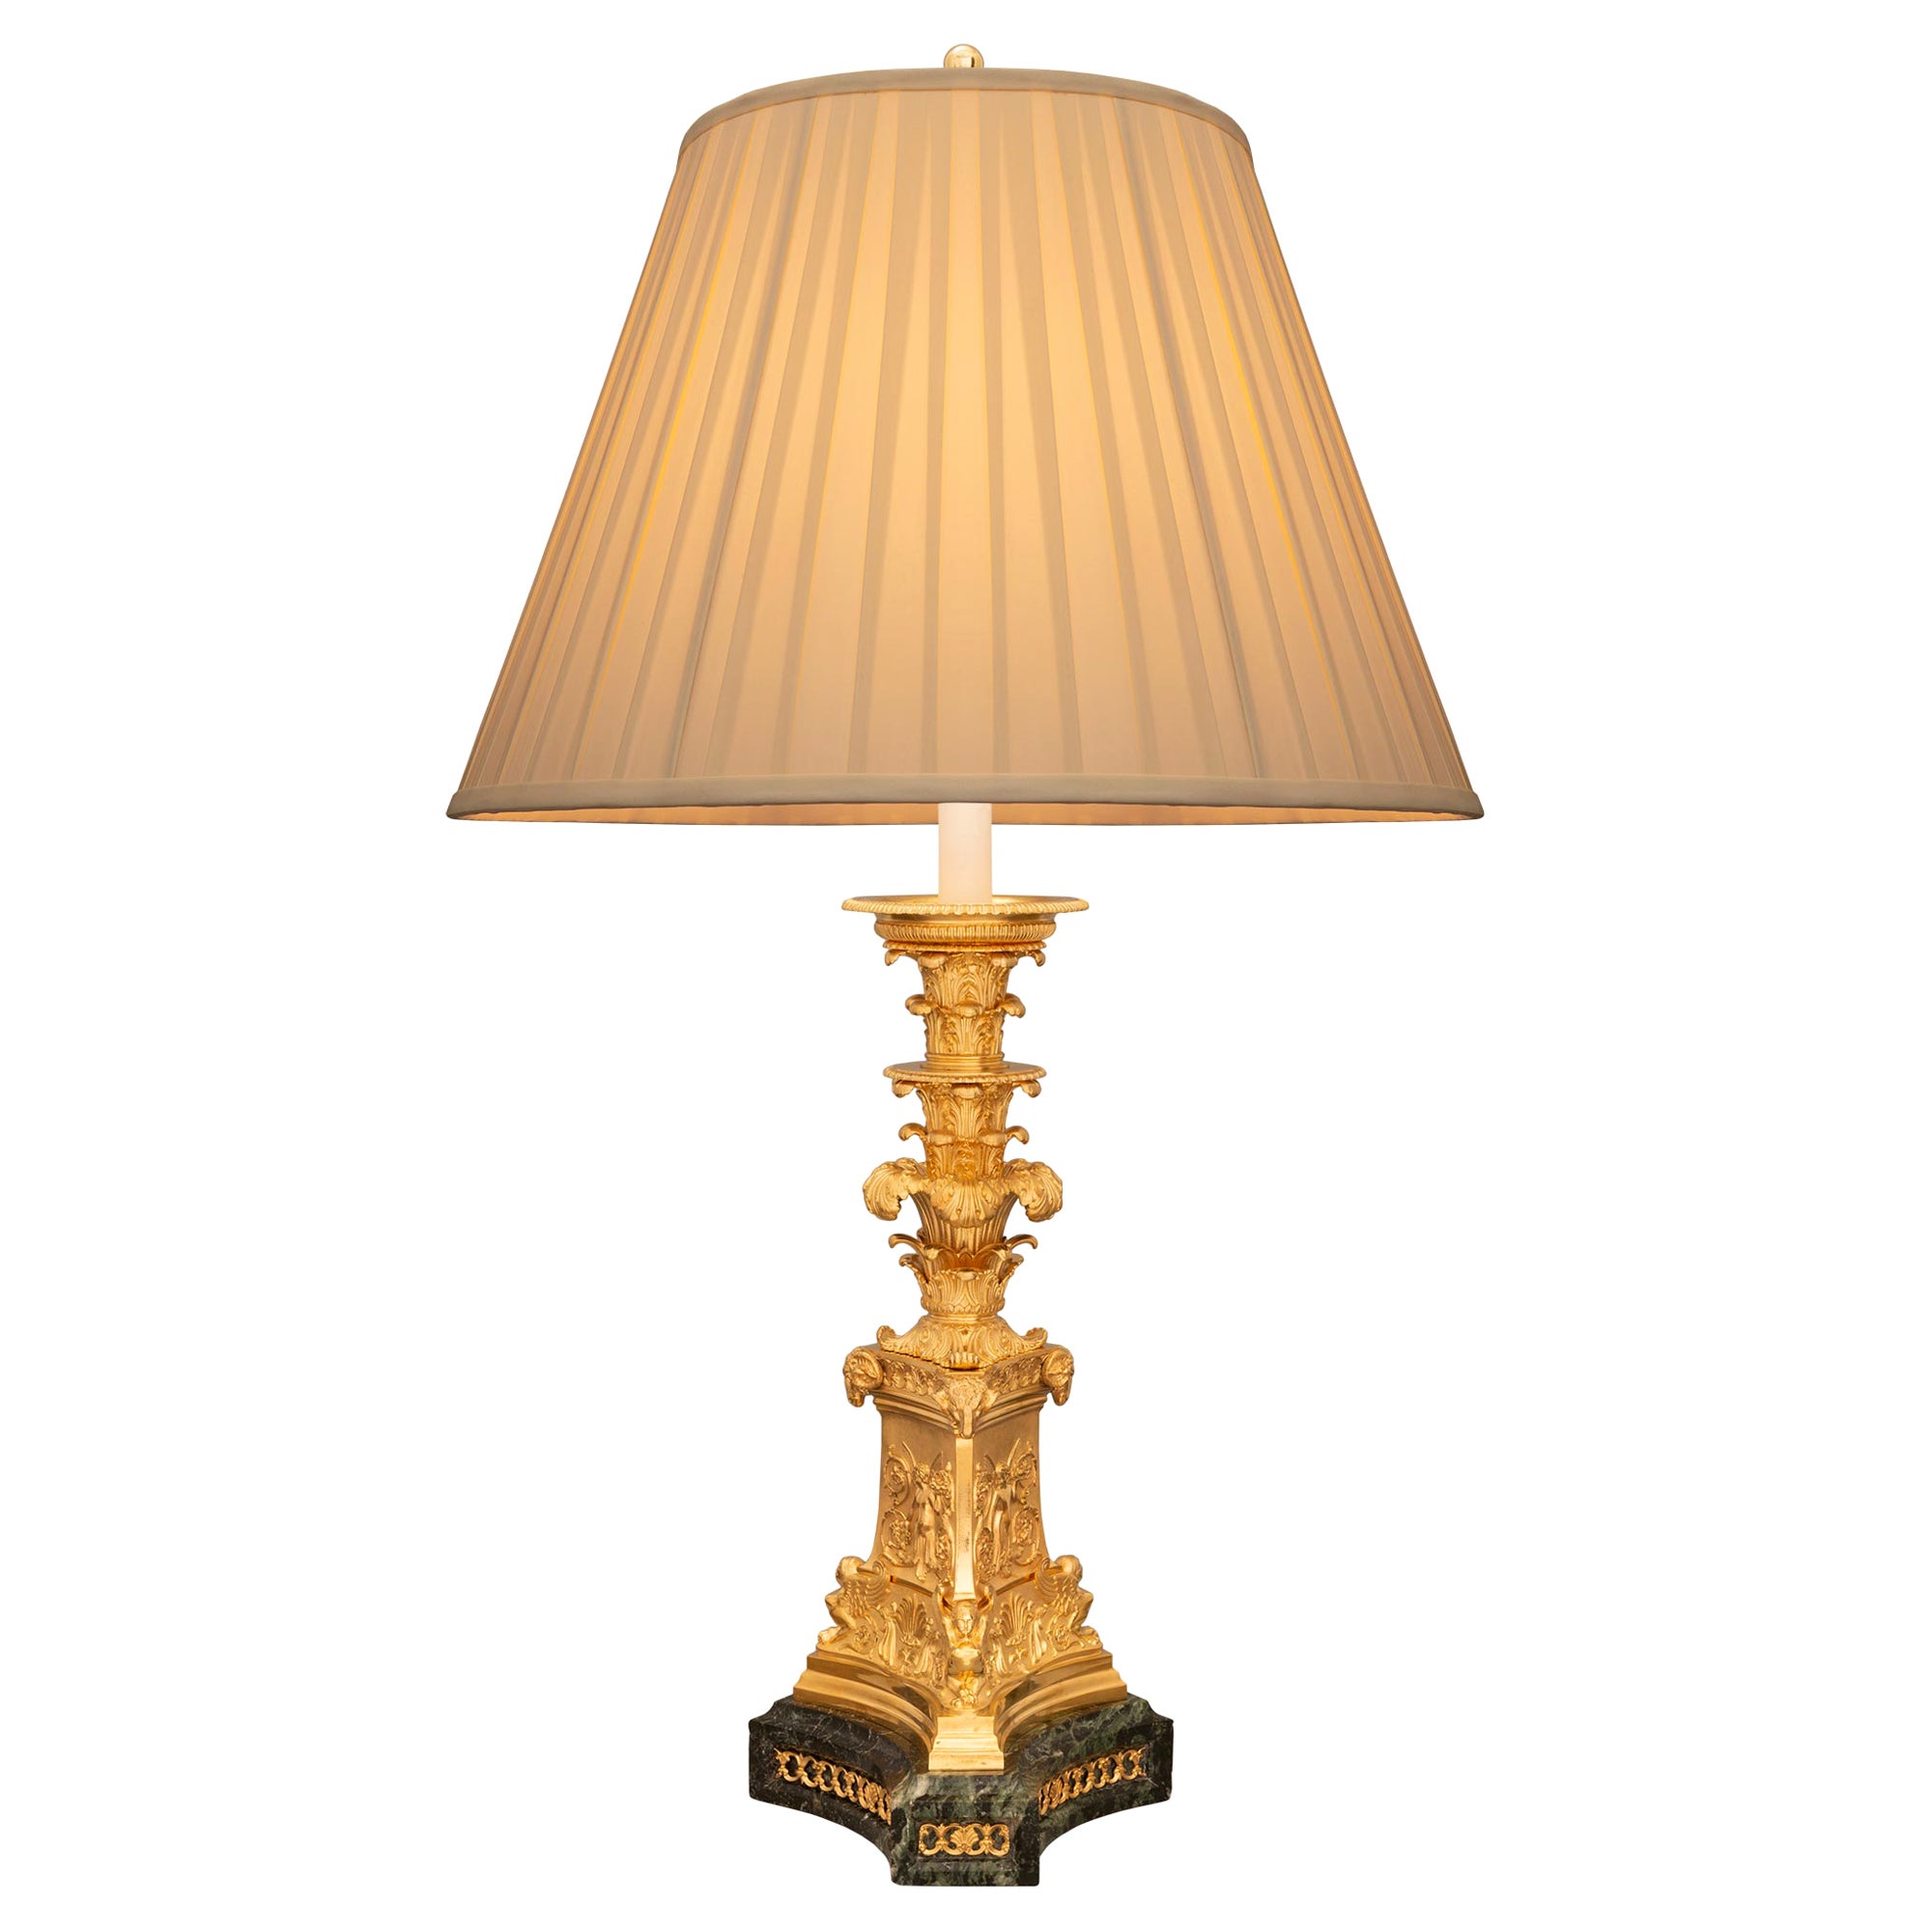 French 19th Century Empire St. Belle Époque Period Marble and Ormolu Lamp For Sale